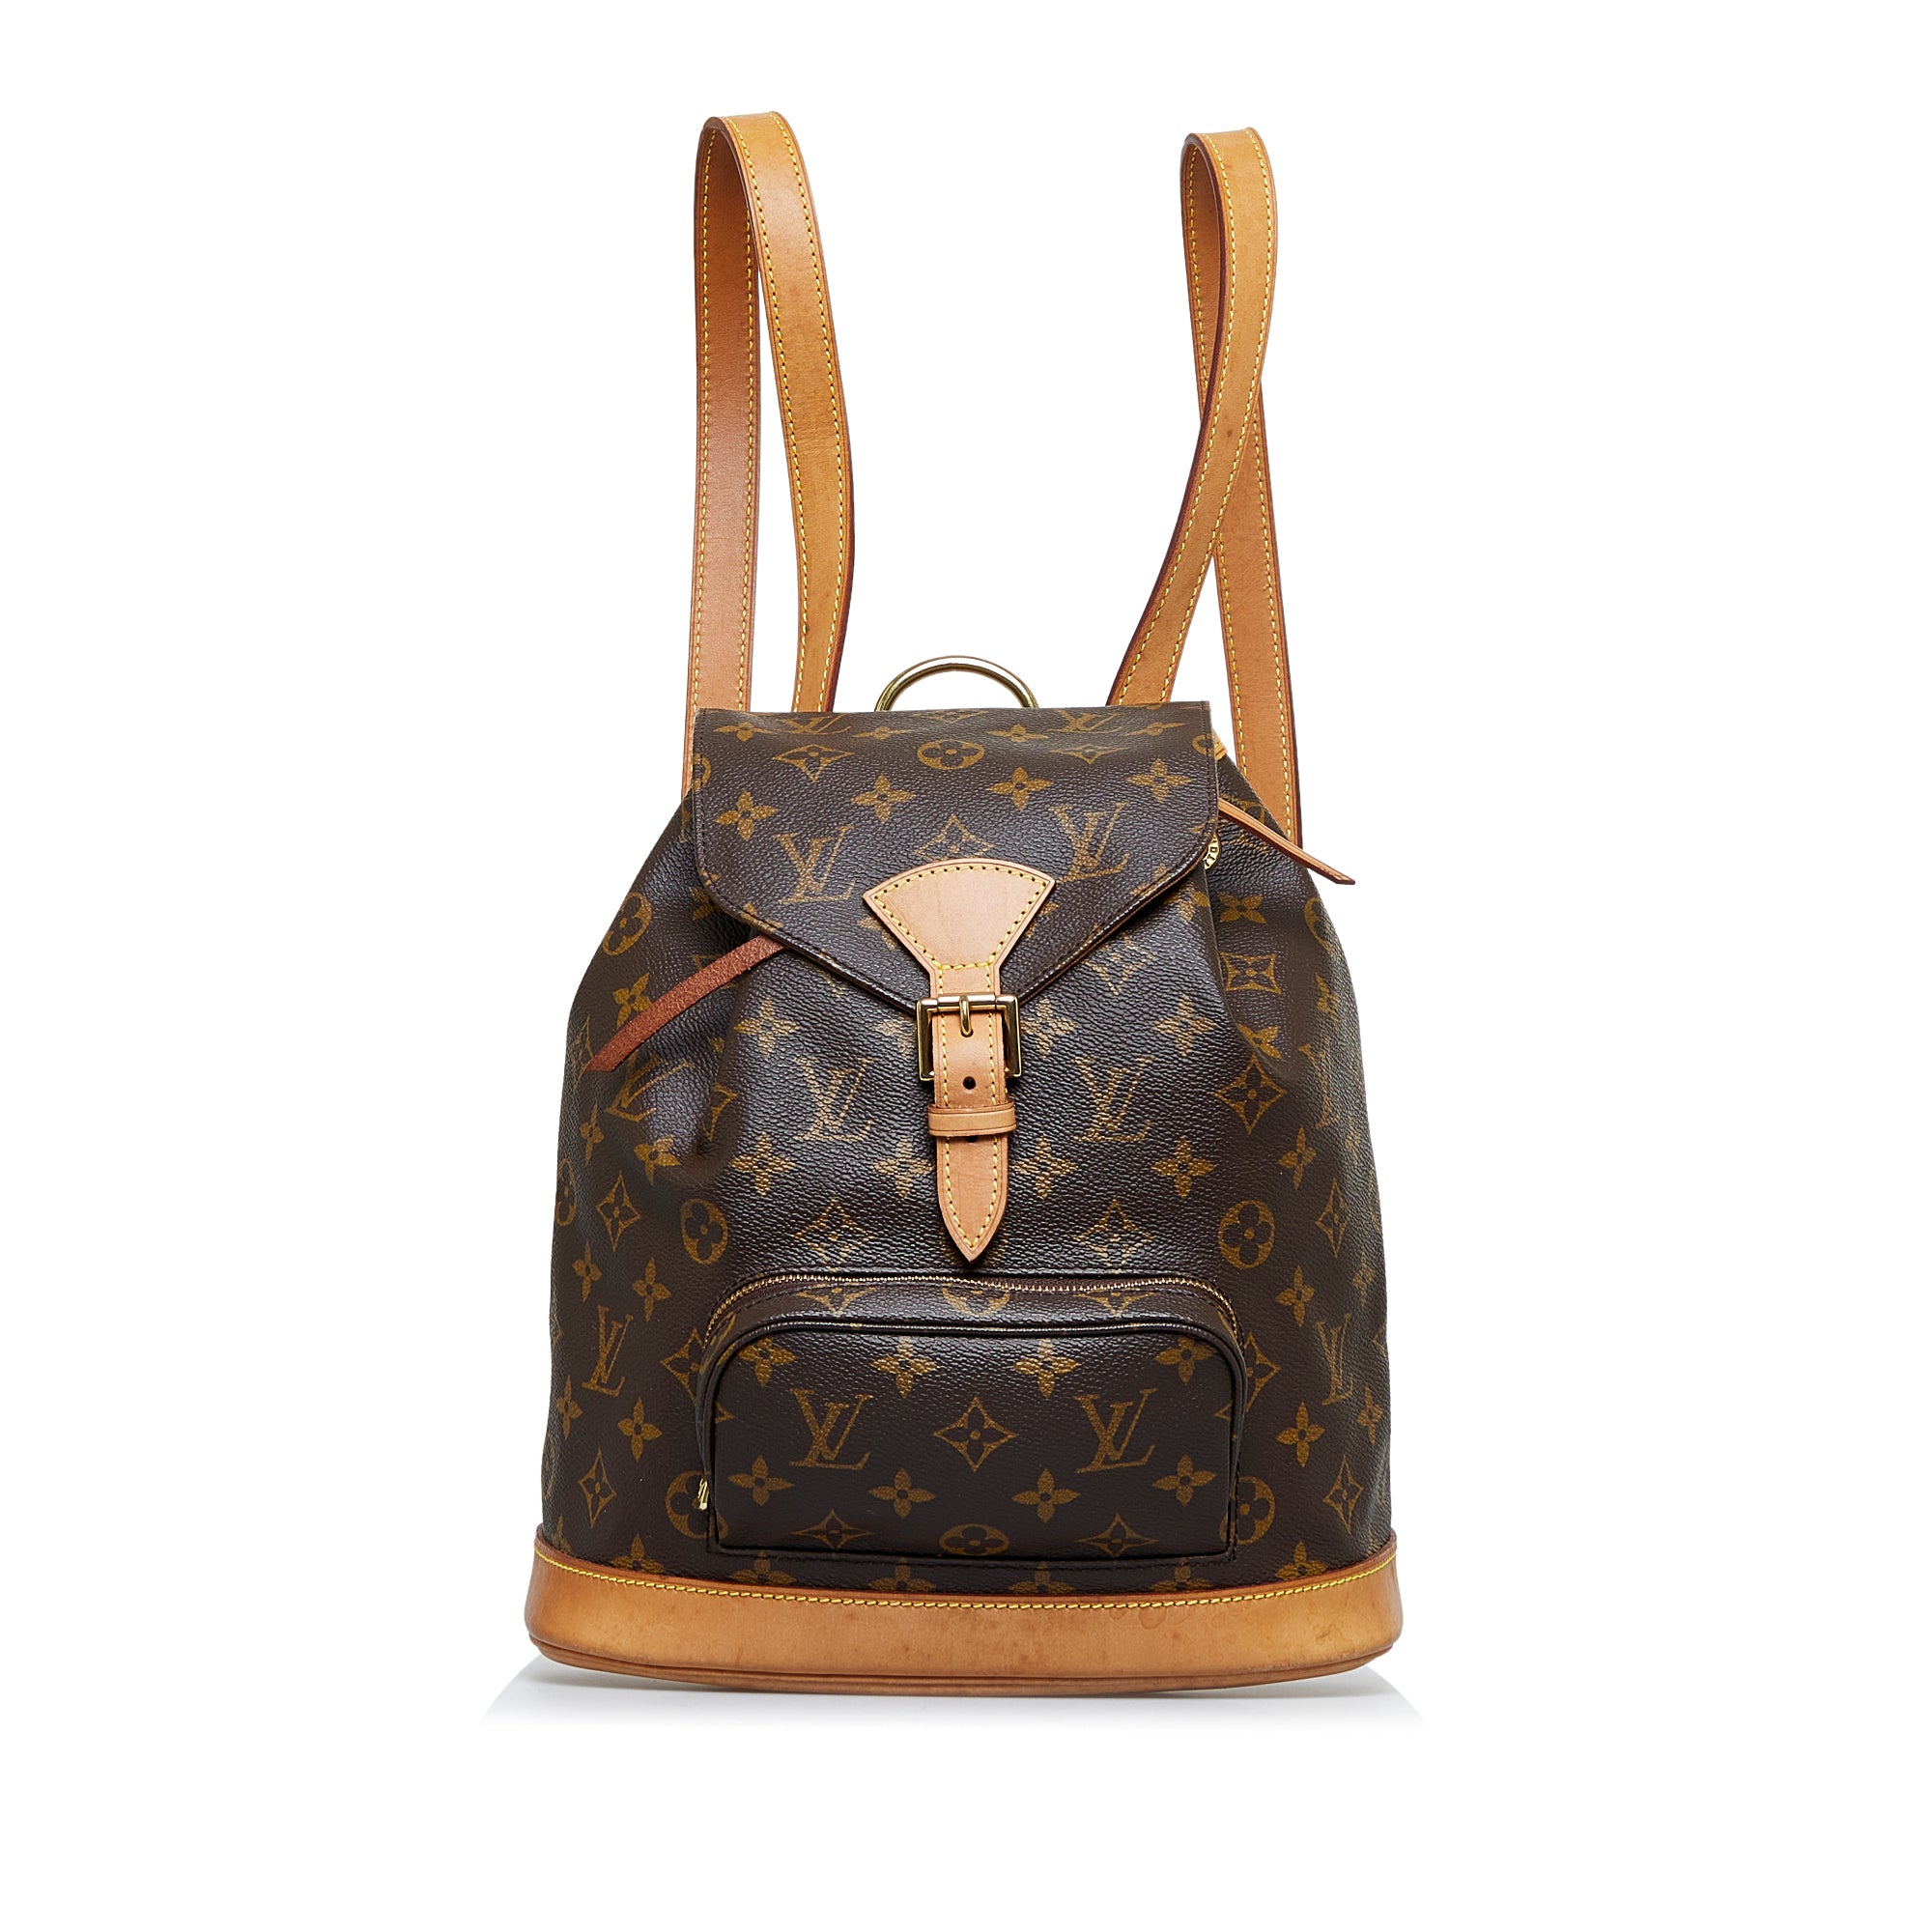 LV Palm Springs Mini : Should i be concerned about the front pocket  puffiness and material above pocket? : r/Louisvuitton